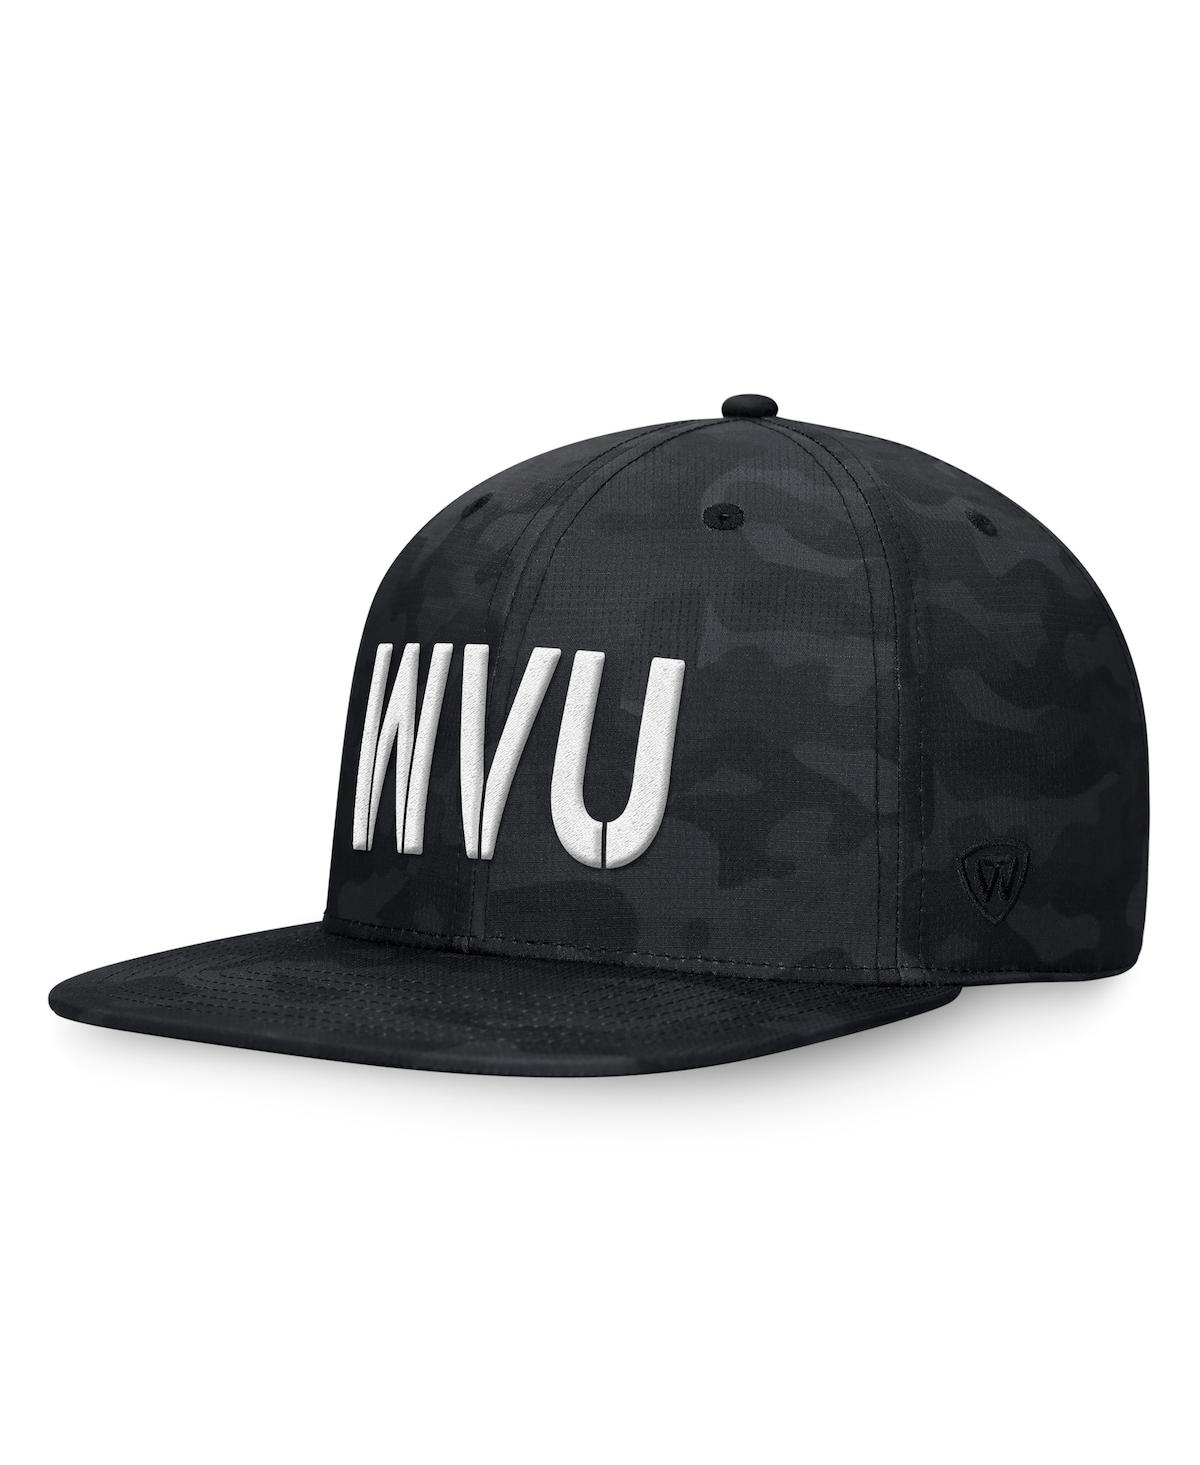 Shop Top Of The World Men's  Black West Virginia Mountaineers Oht Military-inspired Appreciation Troop Sna